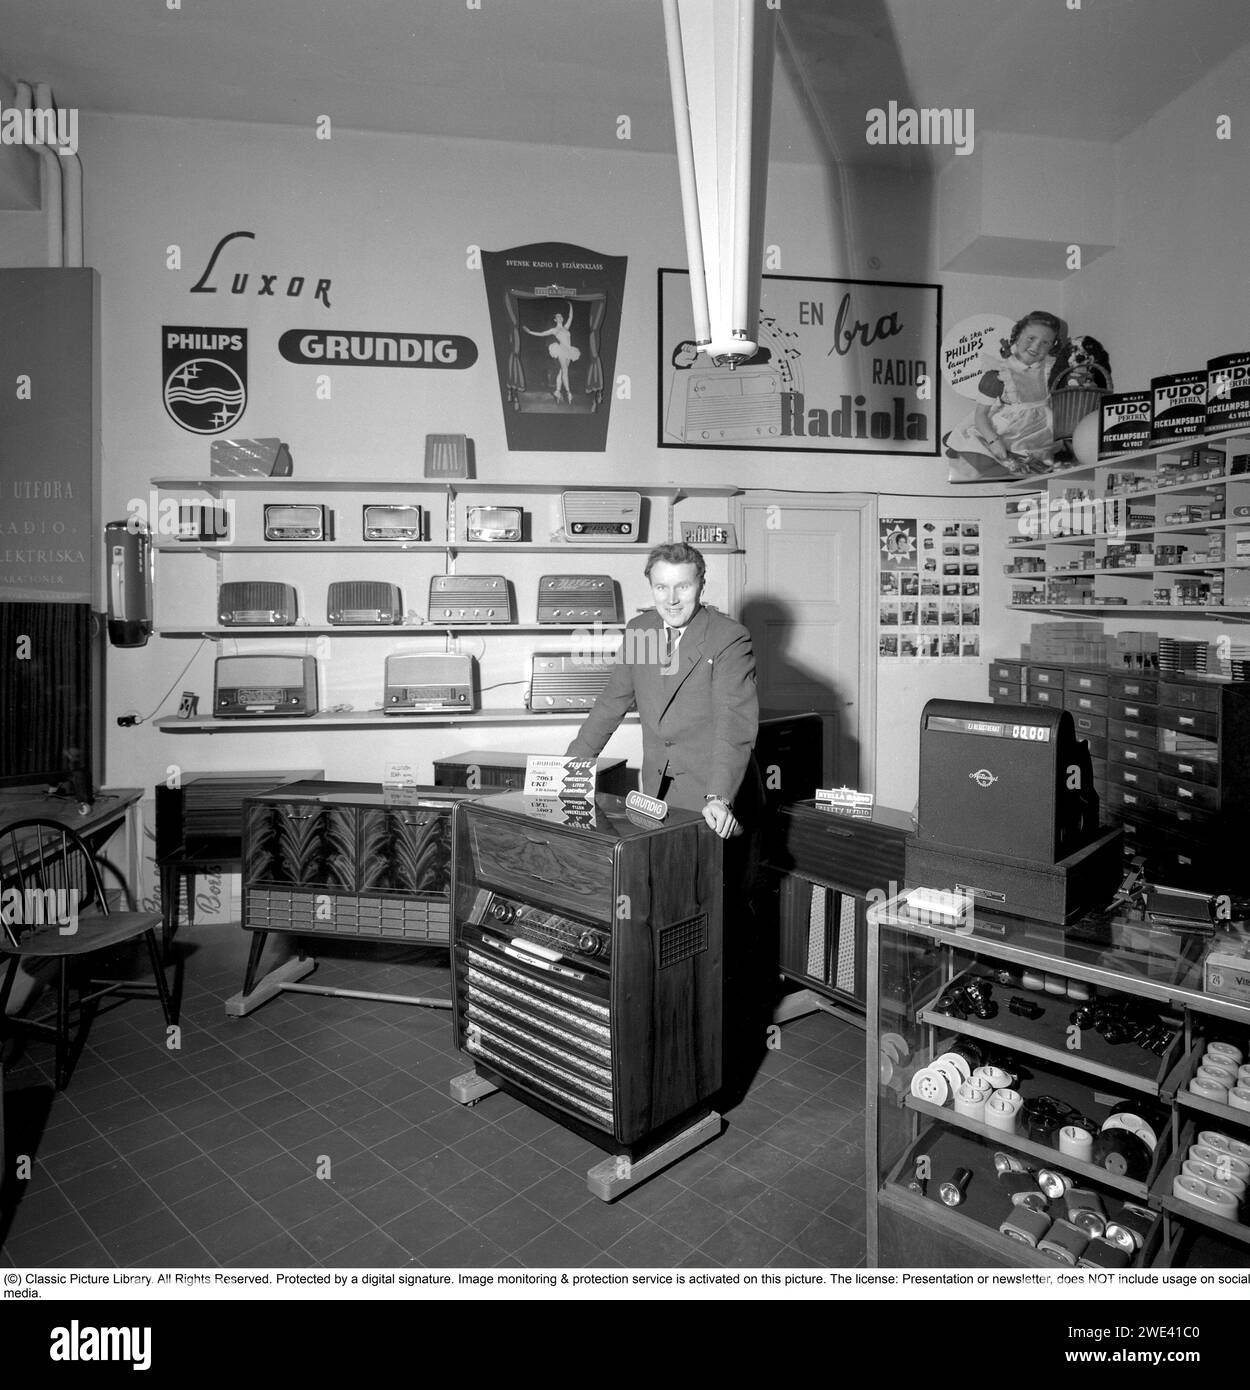 In the 1950s. Interior of a radio and tv store 1956. A salesman is seen at a Grundig radio gramophone Model 7063. On the shelfes are smaller transistor radios and advertisments for brands like Philips, Luxor and Radiola.   Conard ref 3210 Stock Photo